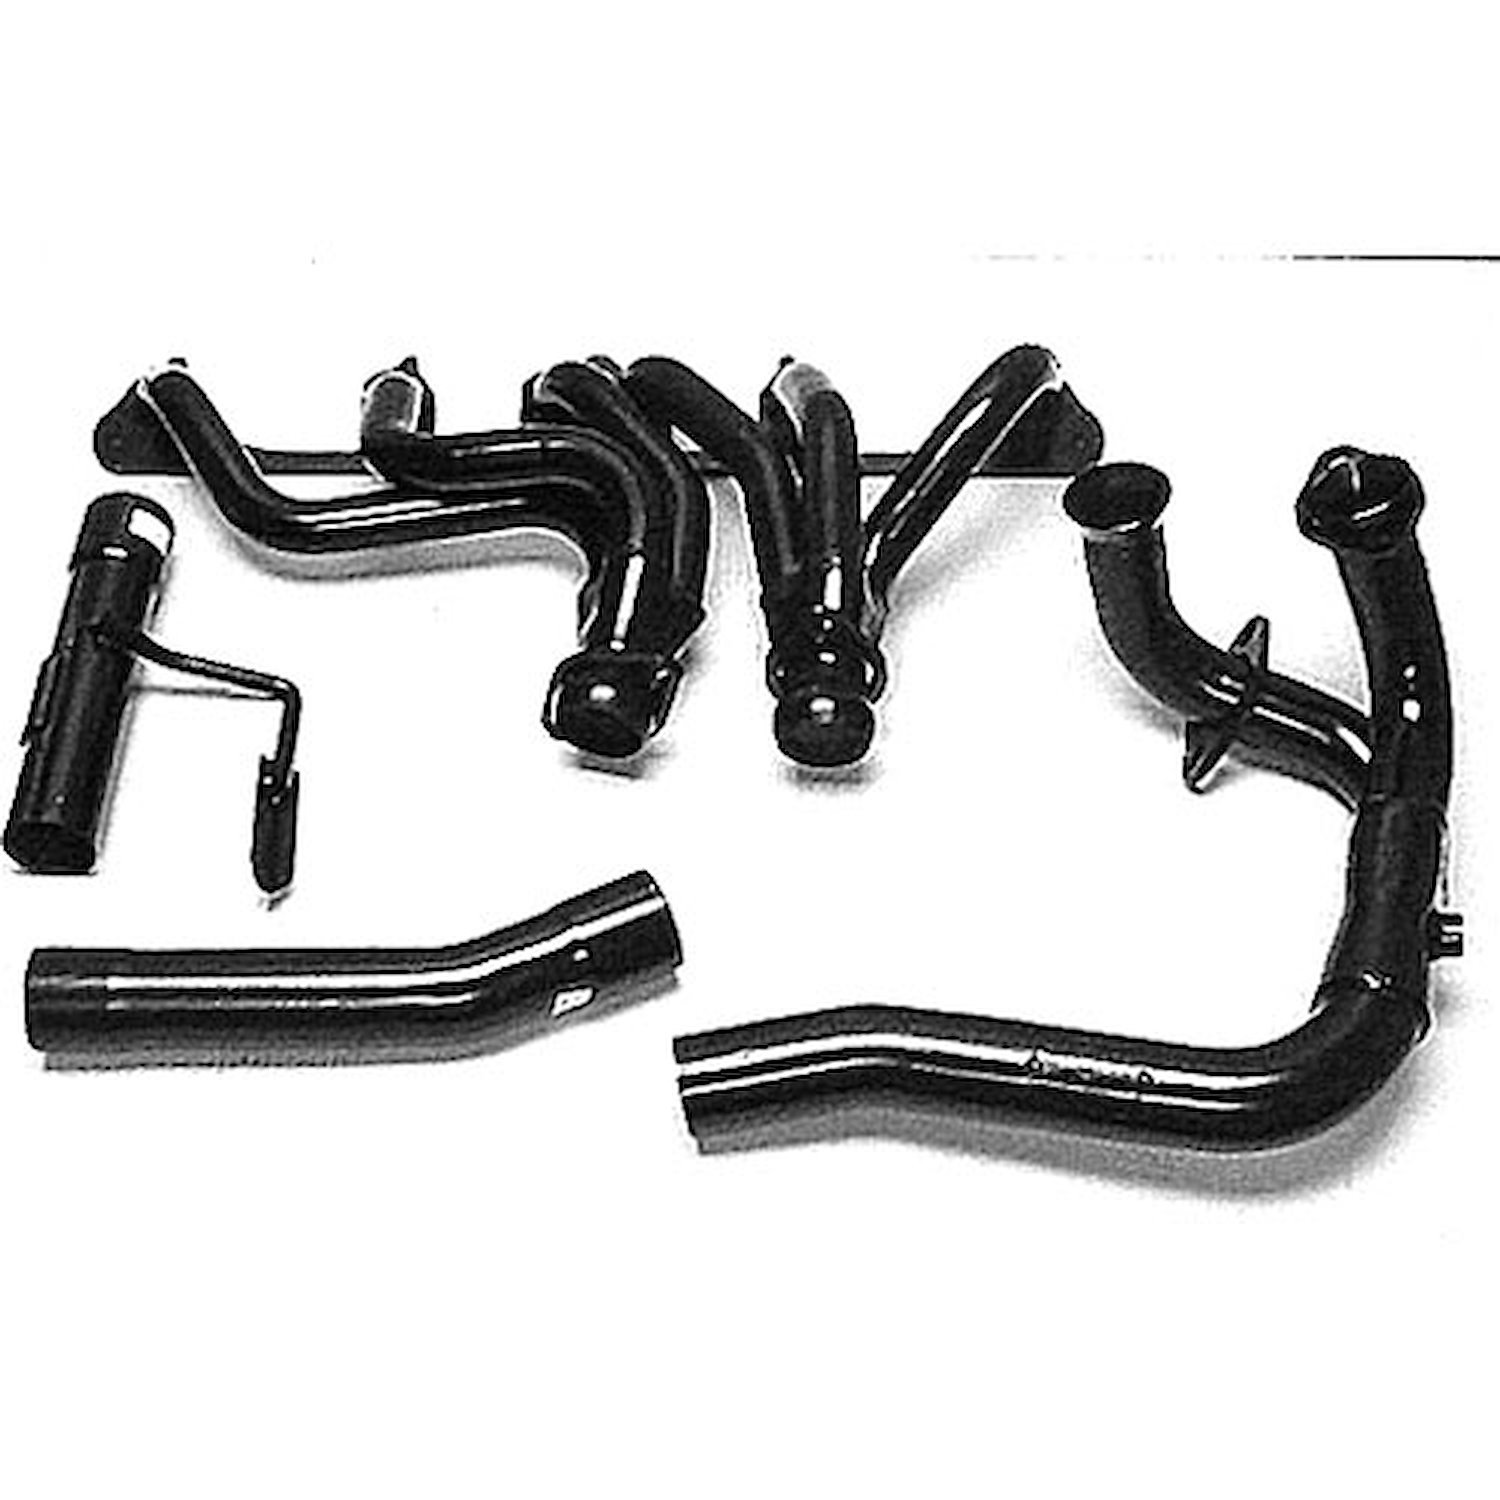 Painted Jeep Header 1991-99 Wrangler 4.0L